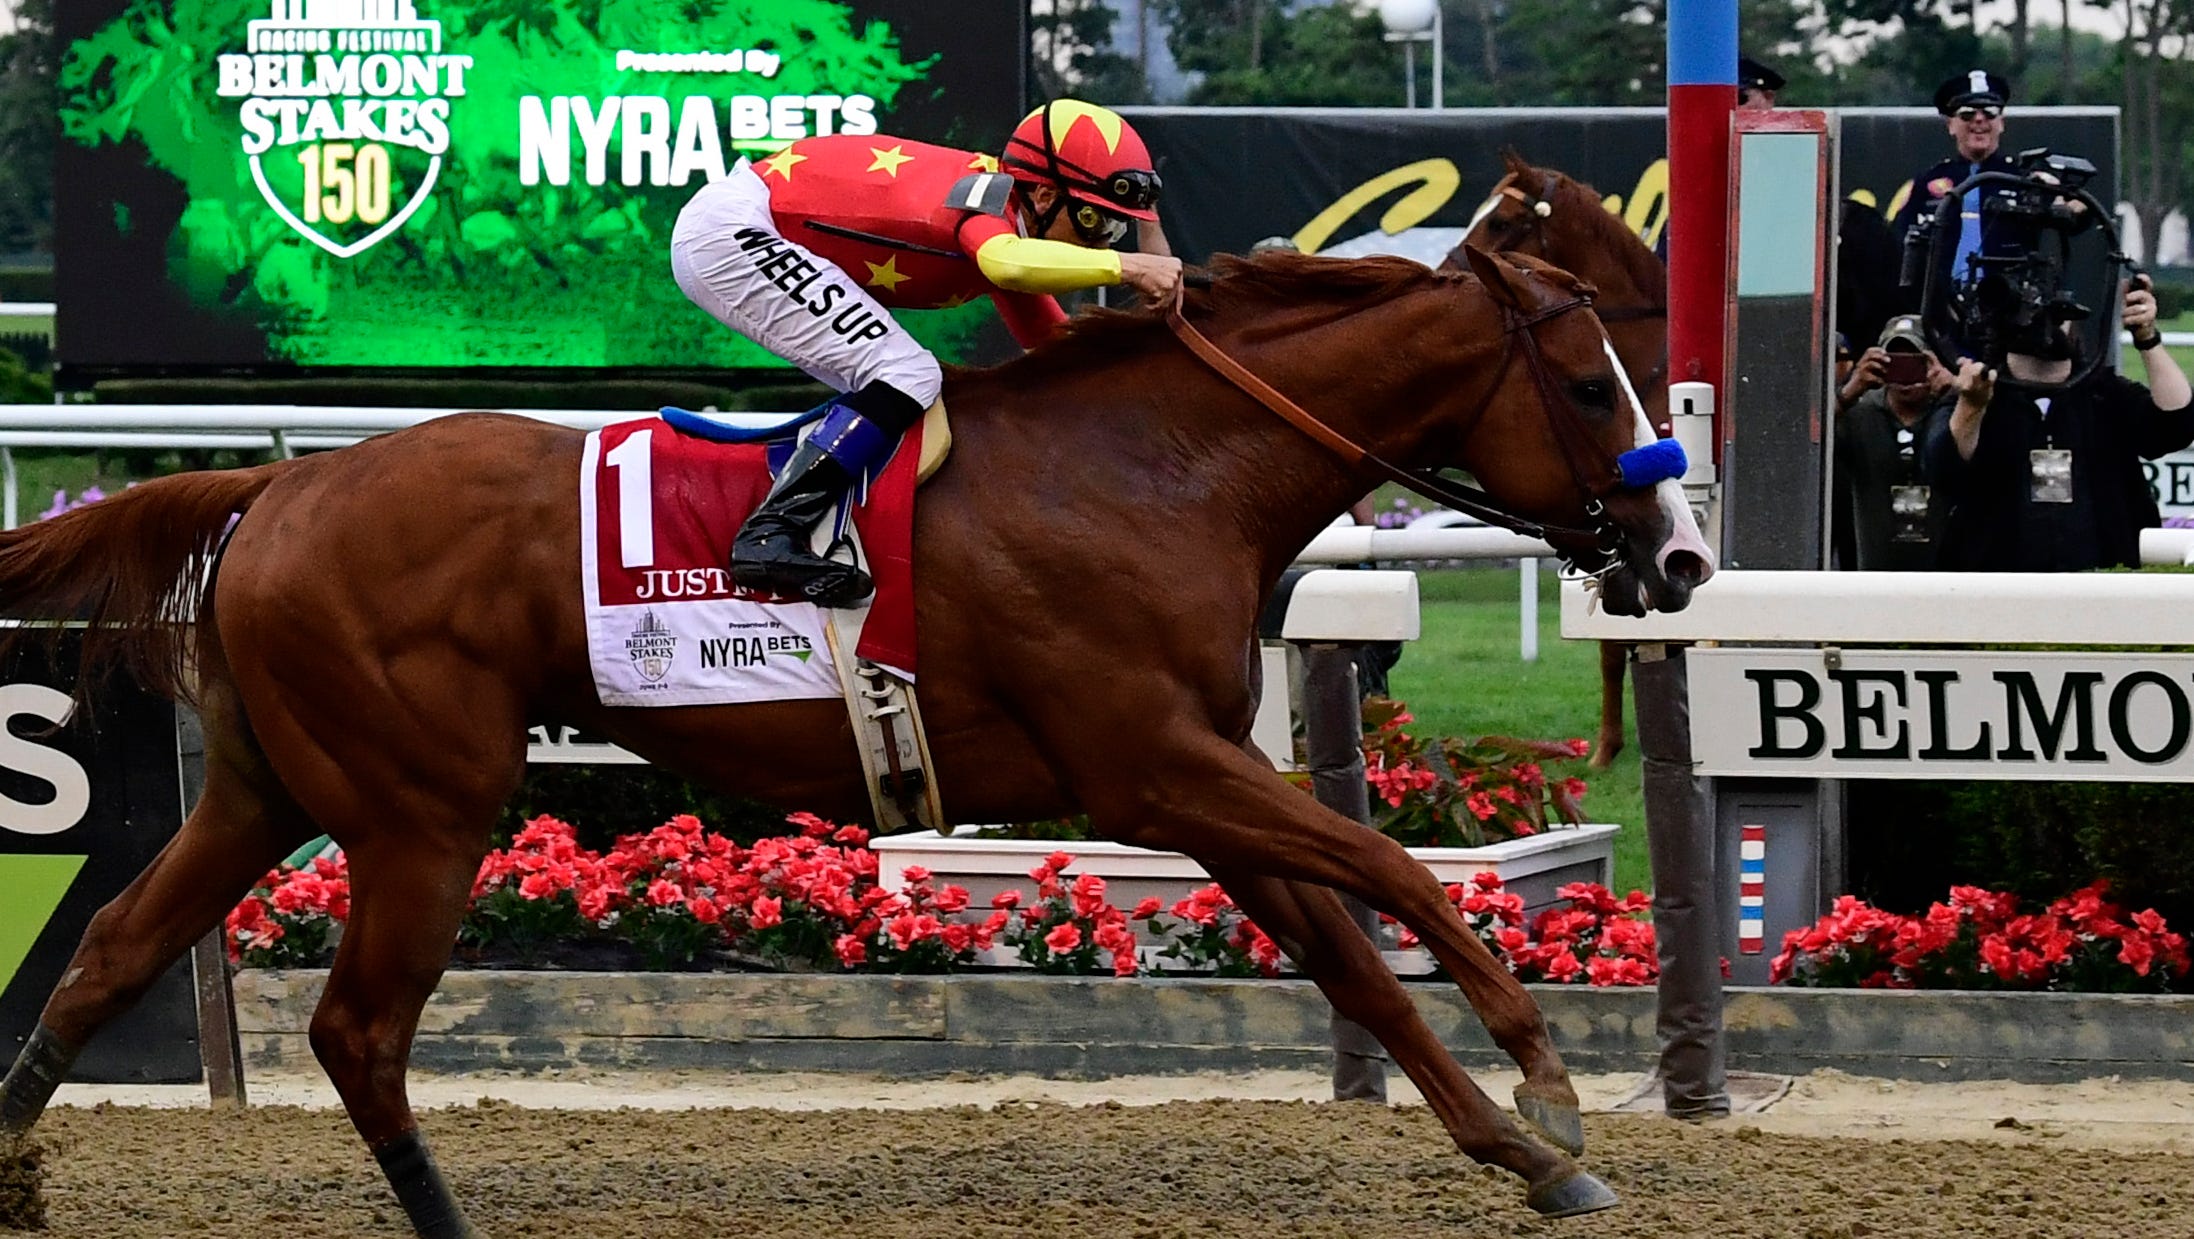 Justify Horse wins Belmont Stakes, captures Triple Crown